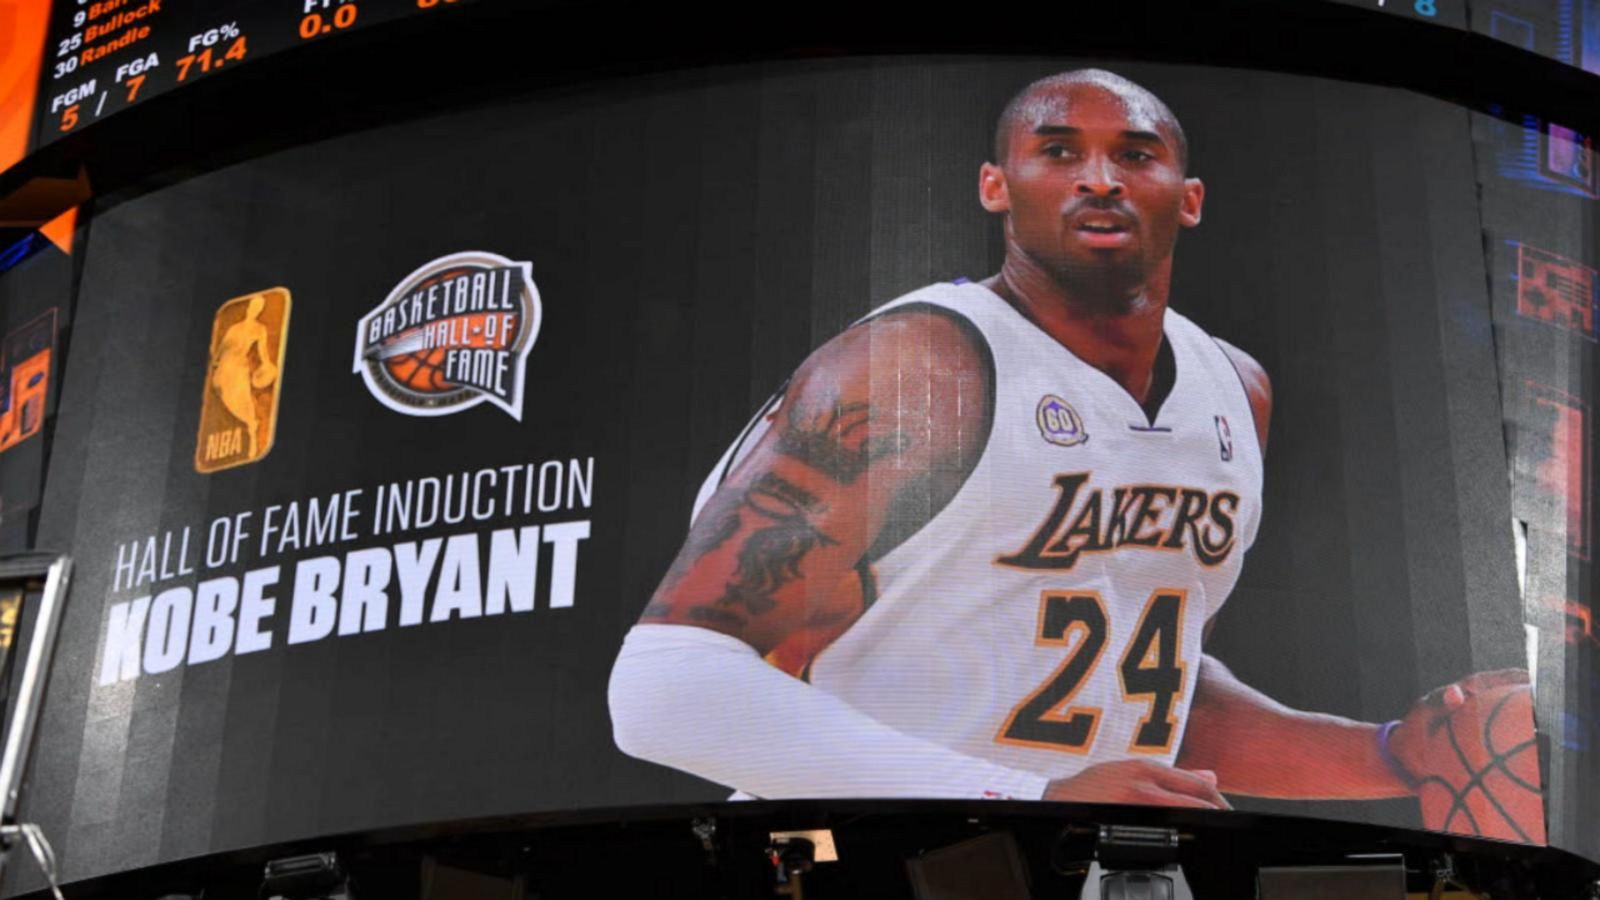 Kobe Bryant credited with reshaping culture of USA Basketball